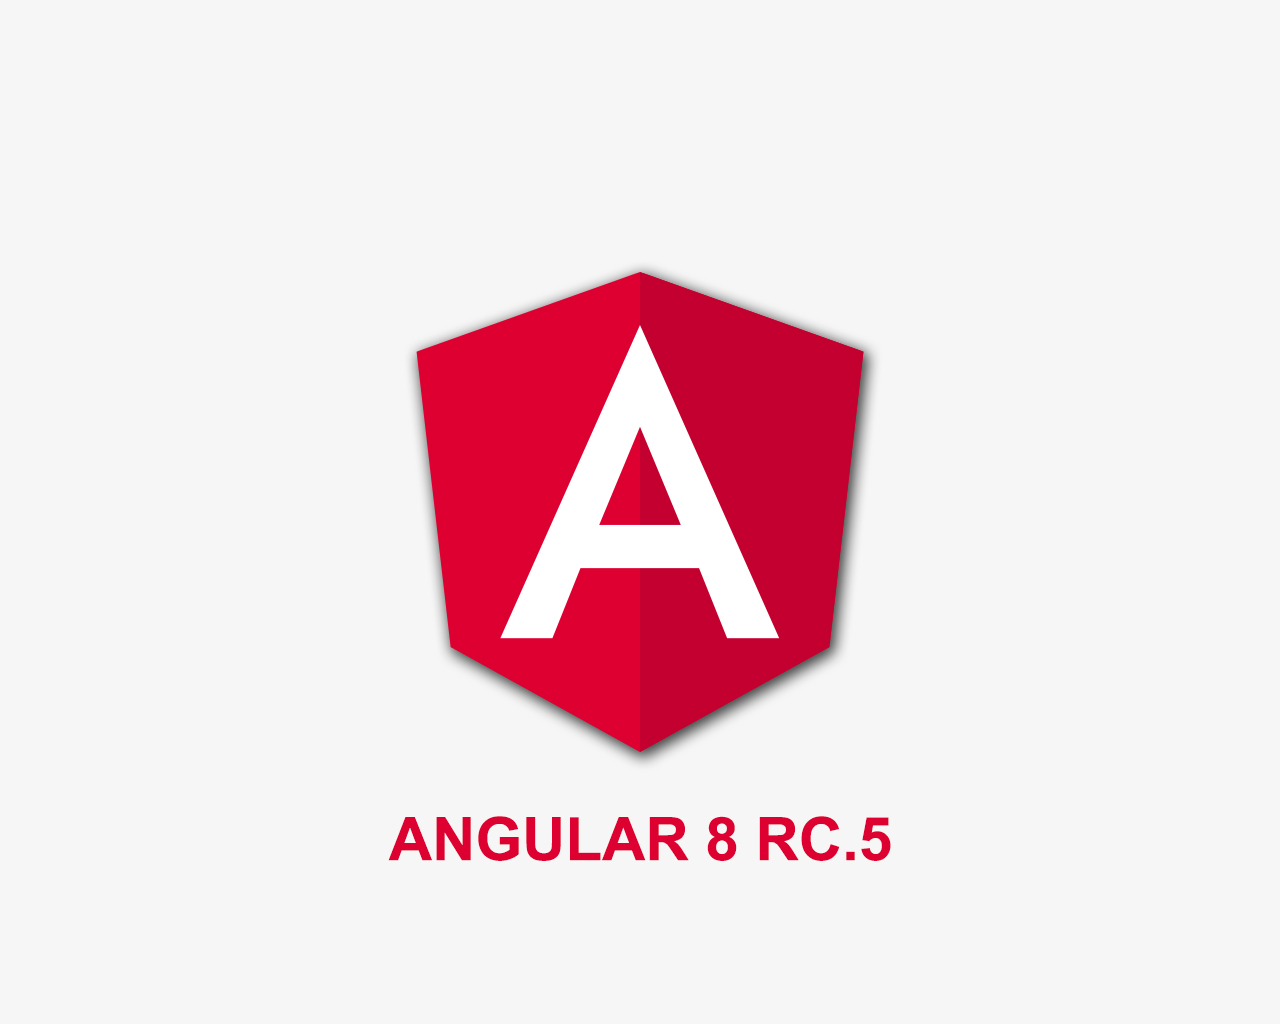 Angular 8 RC.5 - Release Candidate shipped with features and breaking change